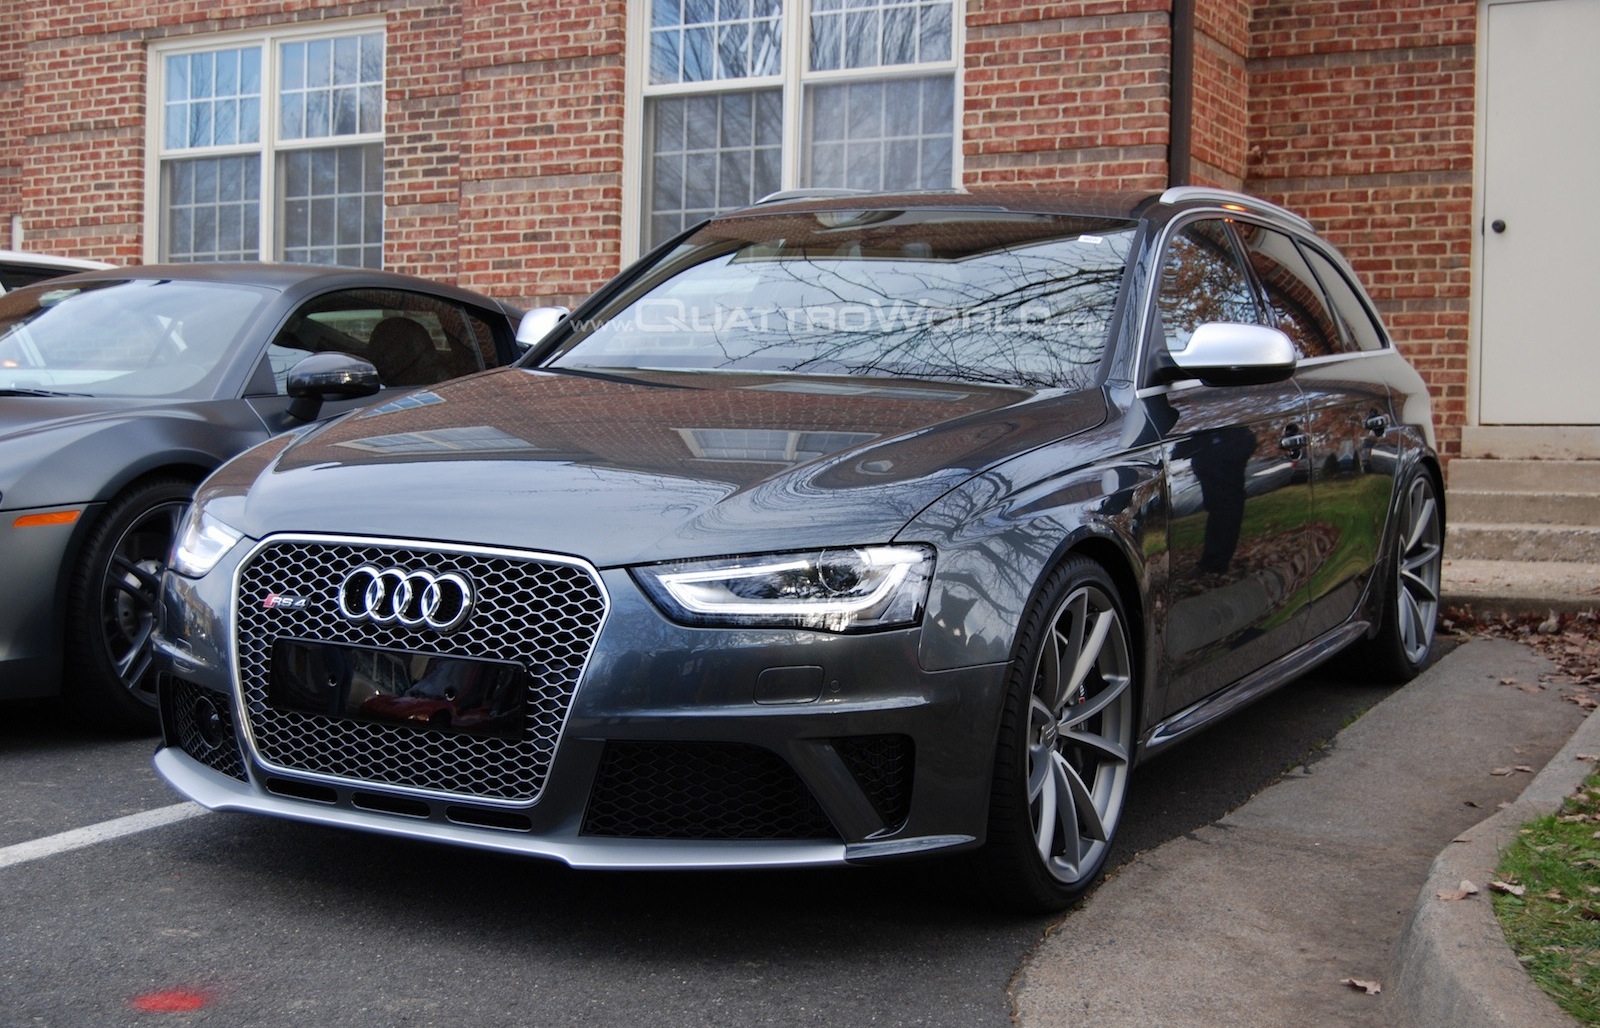 Audi Tests The Waters For RS 4's U.S. Launch With Cars & Coffee Appearance